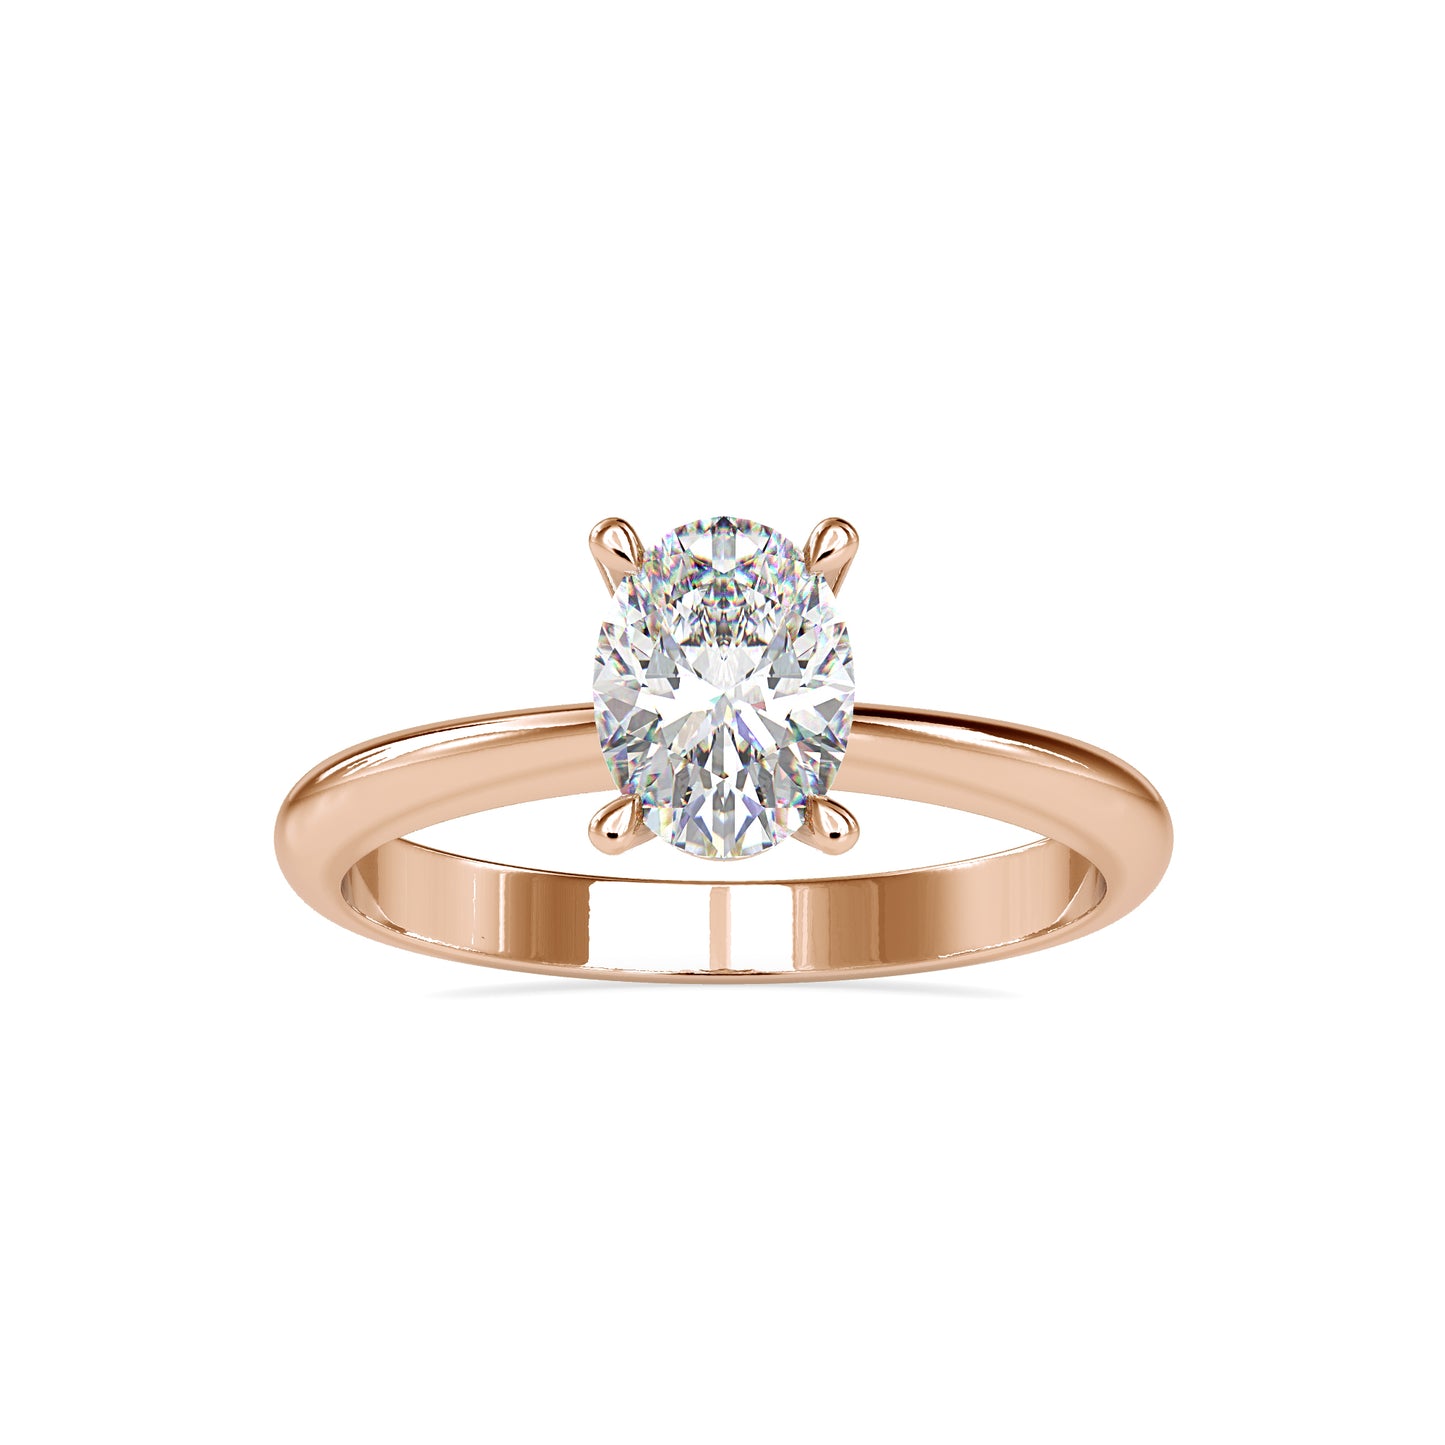 Oval Cut 1.01 CTW Solitaire Diamond Ring